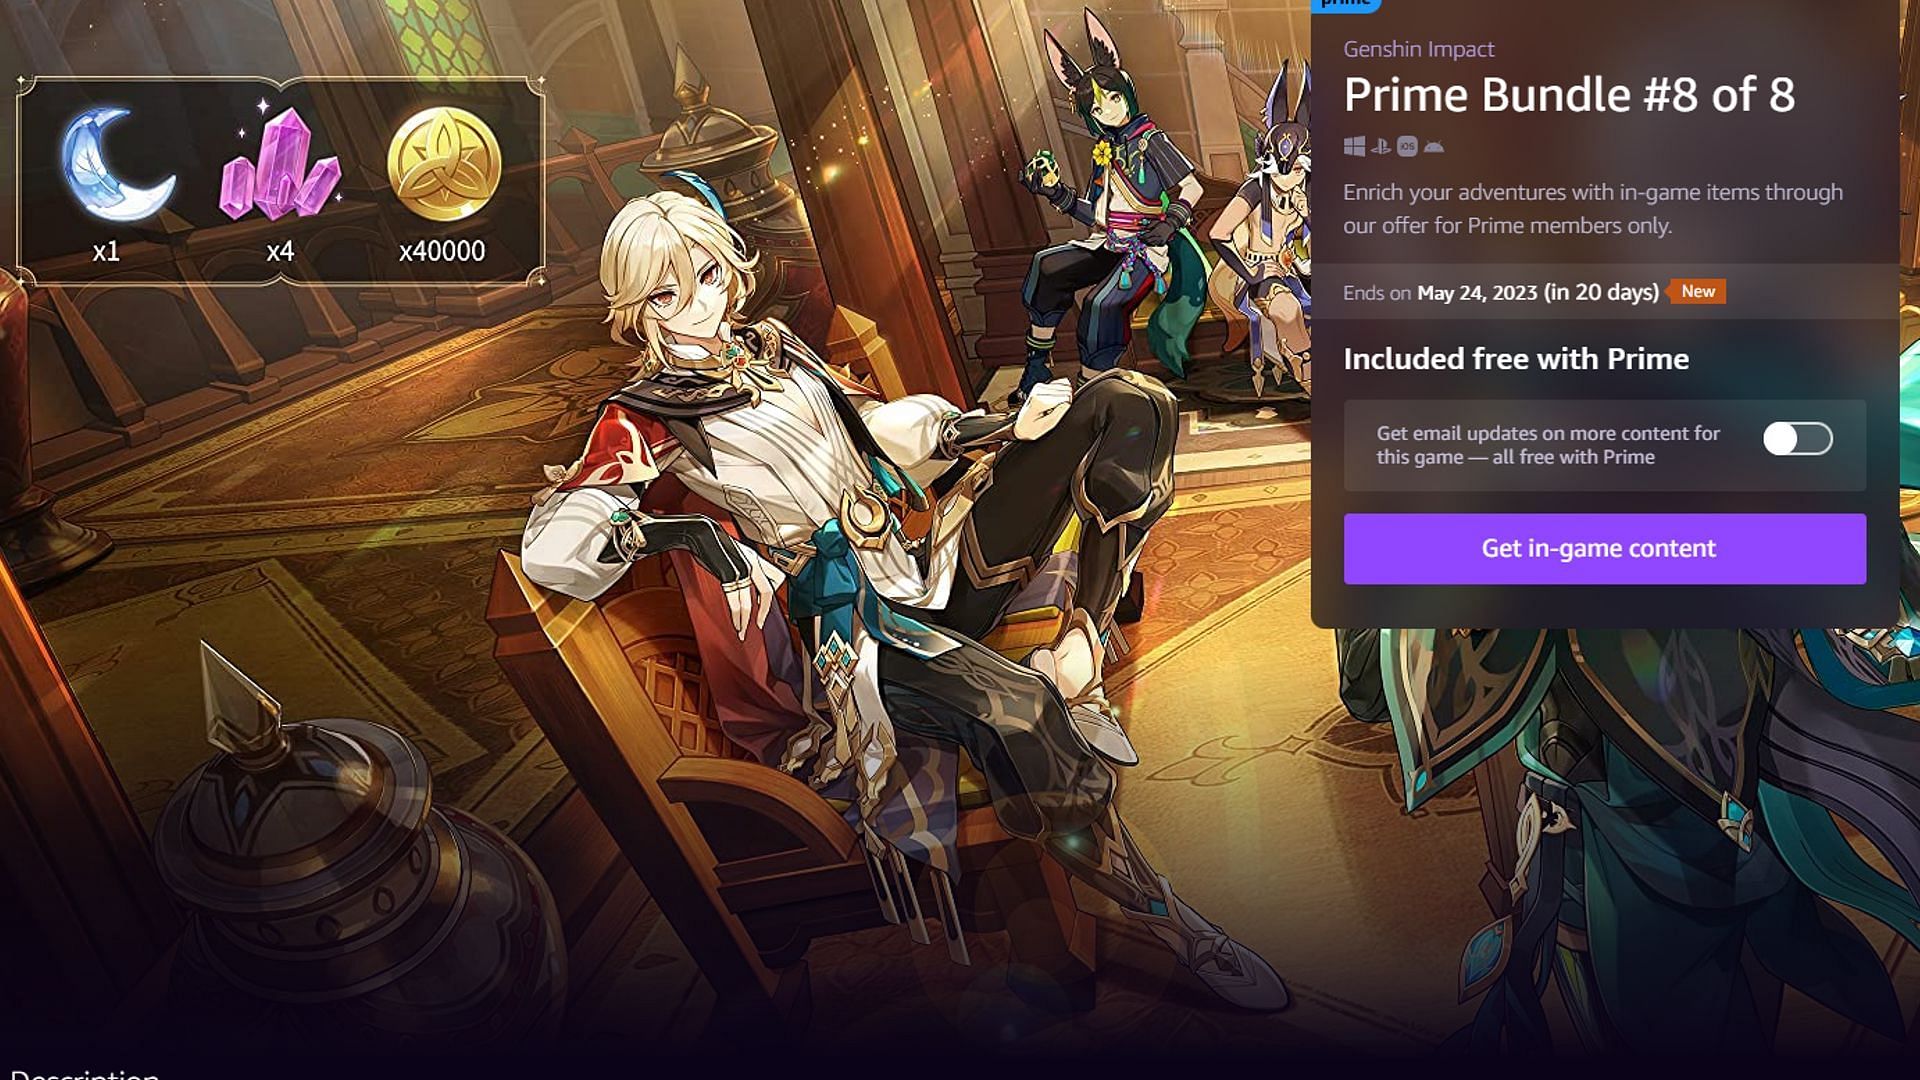 Atsu on X: GENSHIN IMPACT PRIME GAMING DROP #6 HAS ARRIVED!!! You can  start a free trial of @primegaming for monthly Genshin goodies and for  those of you that already have Prime